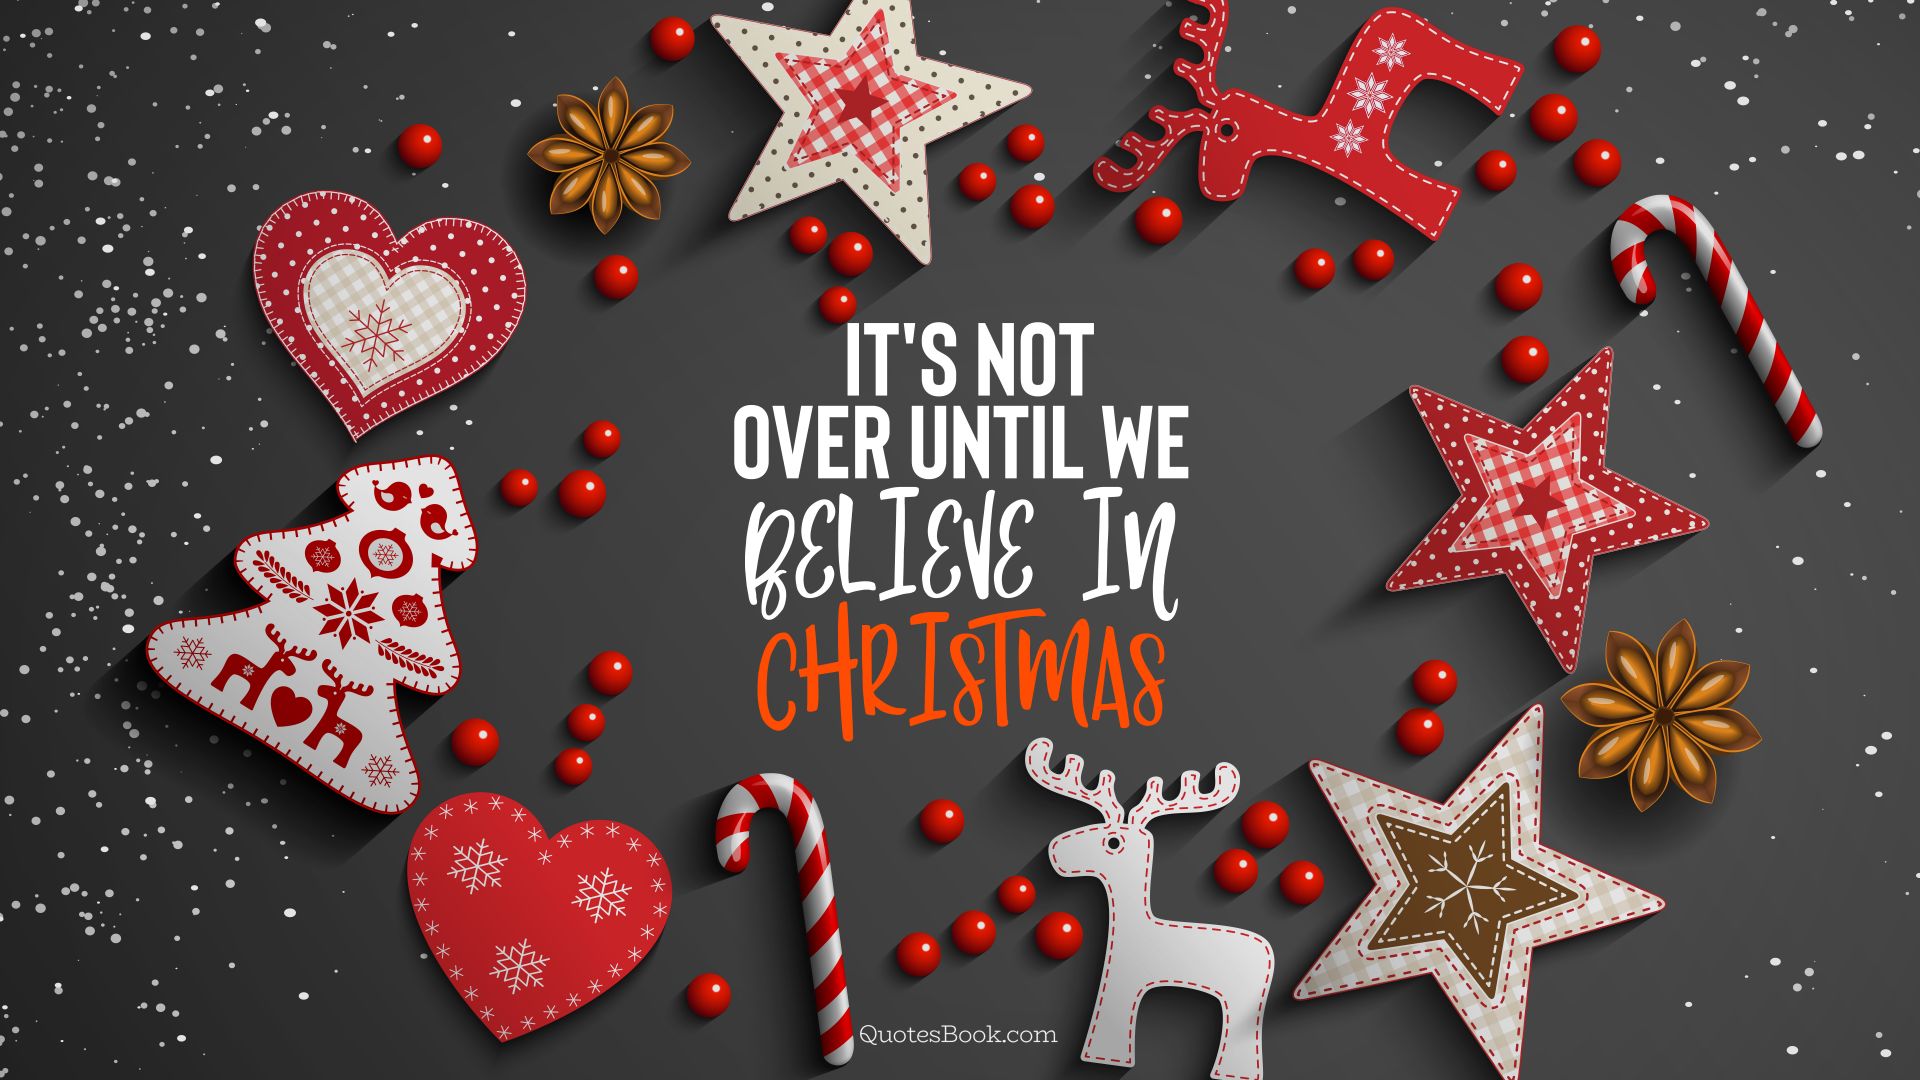 It's not over until we believe in Christmas. - Quote by QuotesBook